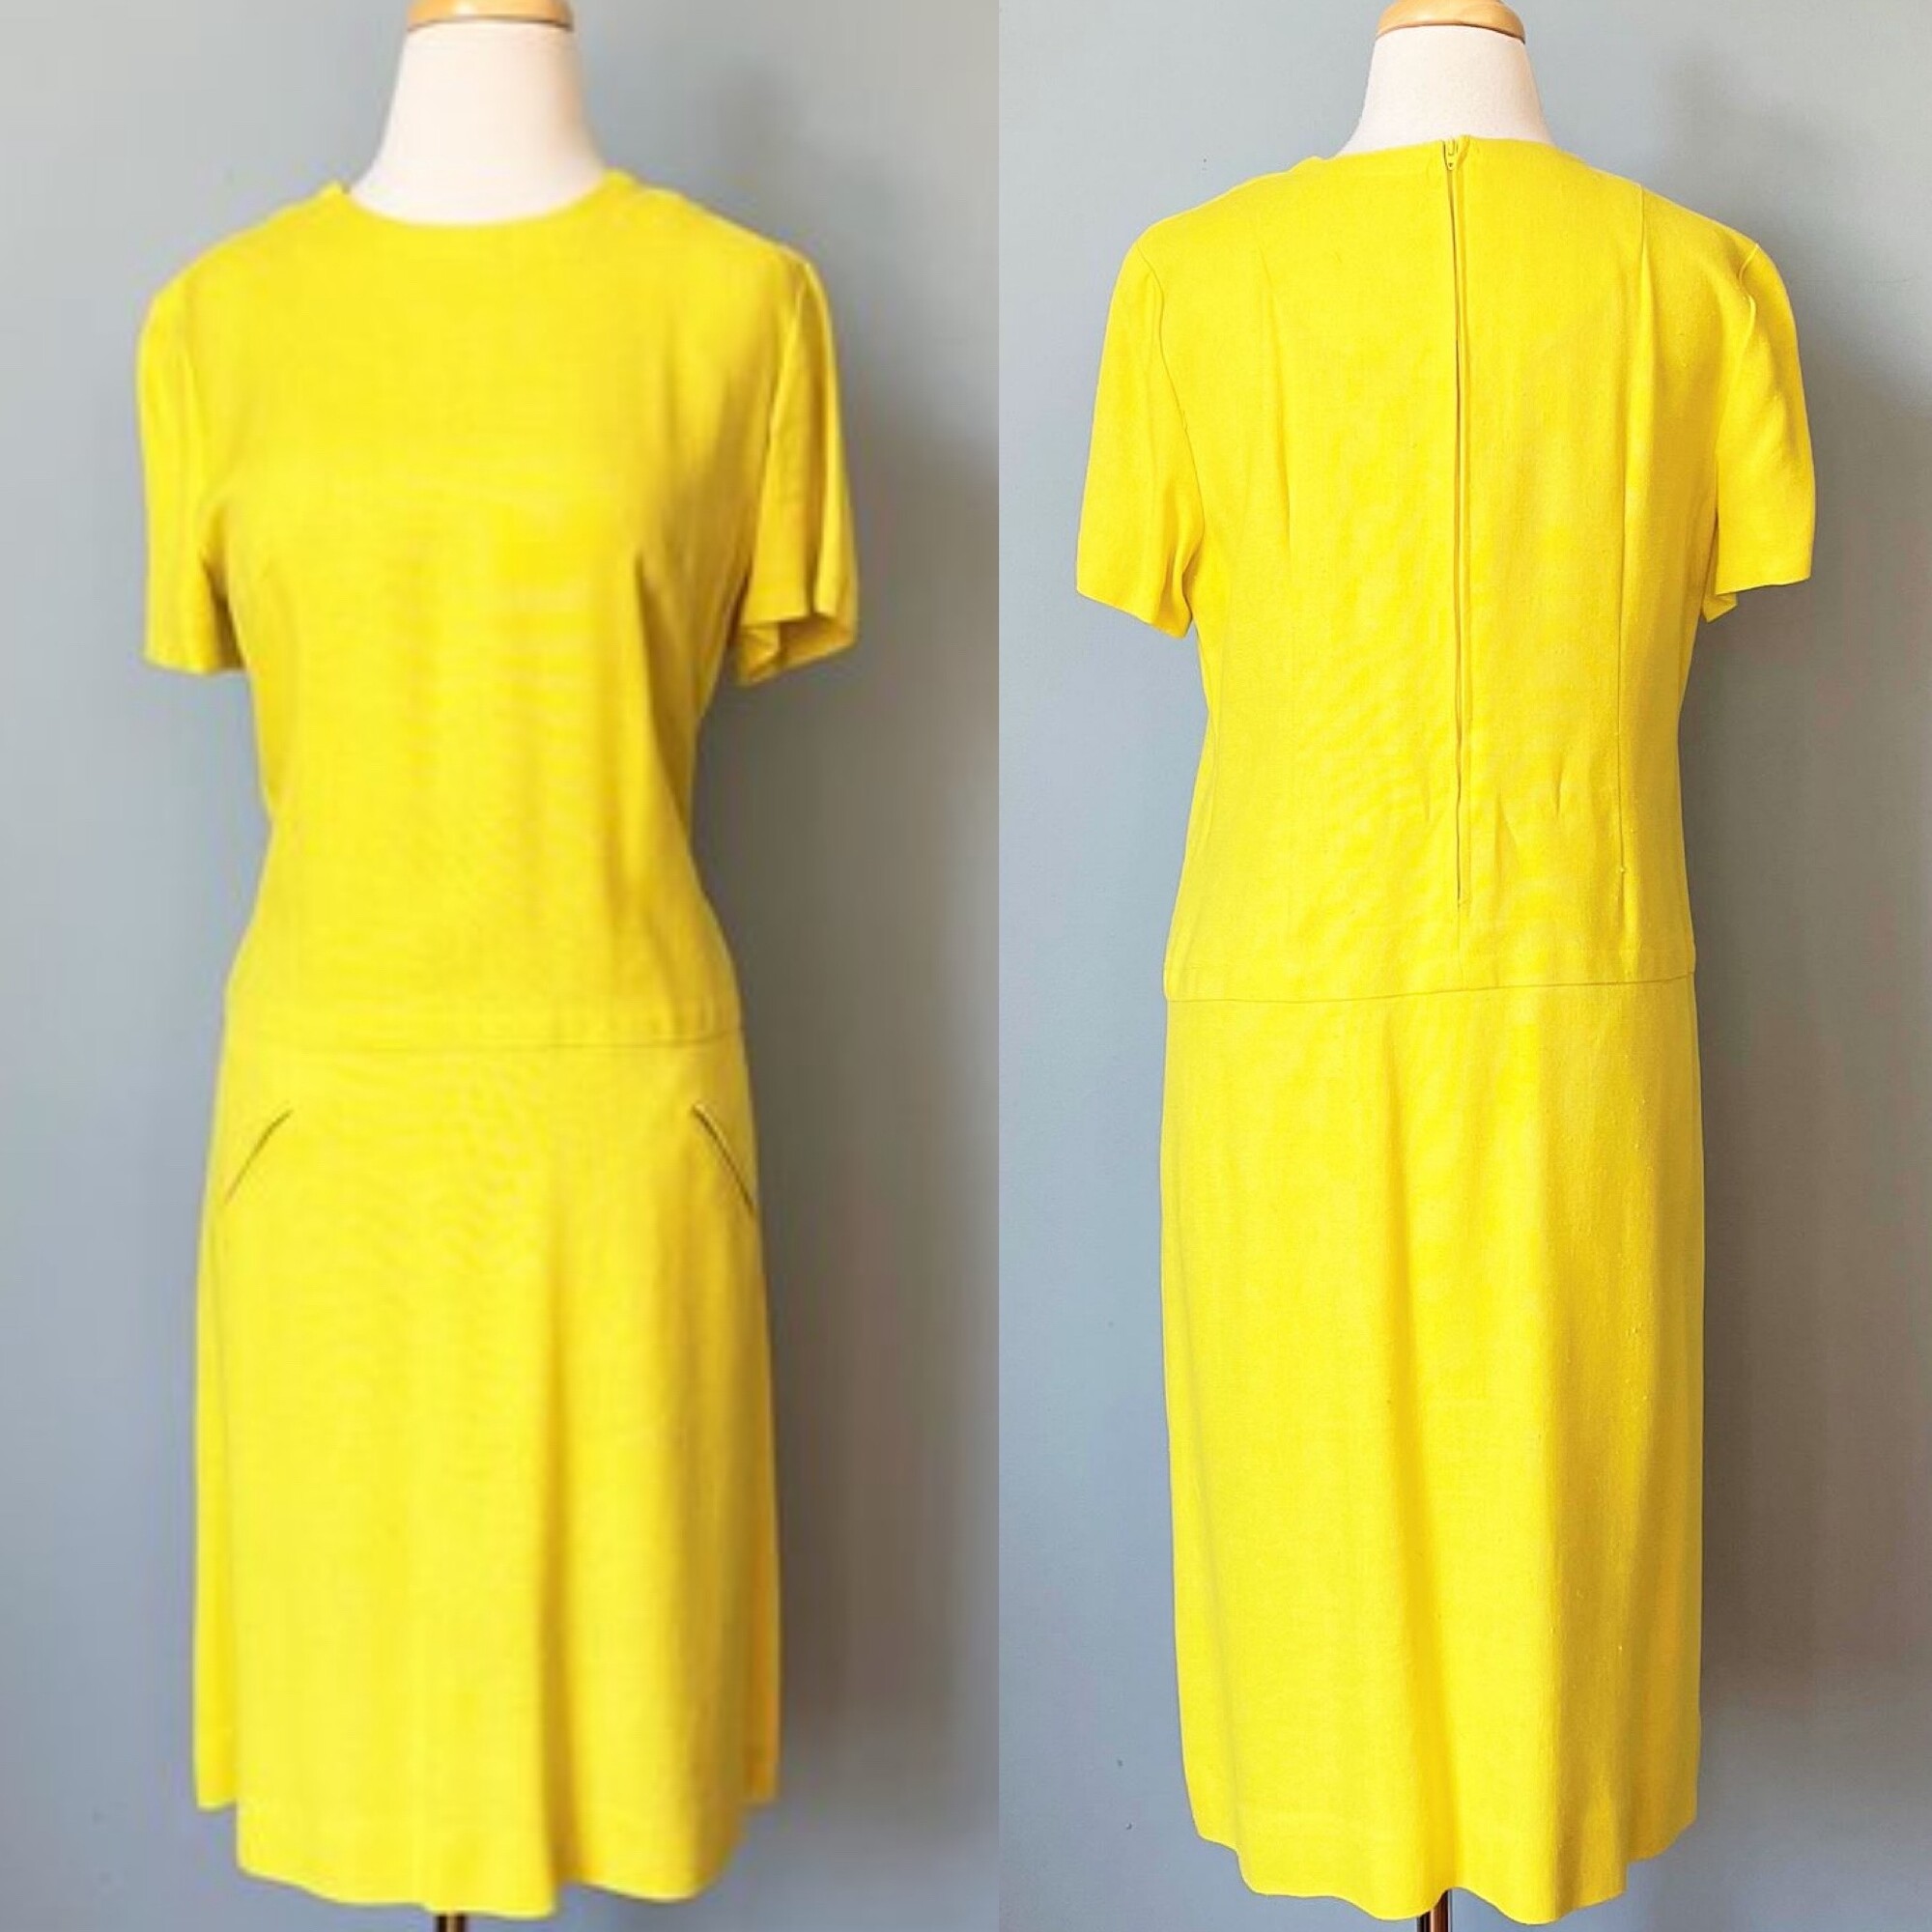 This is something I could see Twiggy wearing.  It is so cute.
Yellow Dress from the 1960s.
Short Sleeves
Dropped Waist
The fabric is a slubby linen or linen blend, no fabric tags present
Center back
Unlined
union made
By Madison

Here are the flat measurements, please double where appropriate:
Shoulder to shoulders: 16
armpit to armpit:19
Waist: 18
Hip: 21
Length: 34

Thank you for looking.
#47939